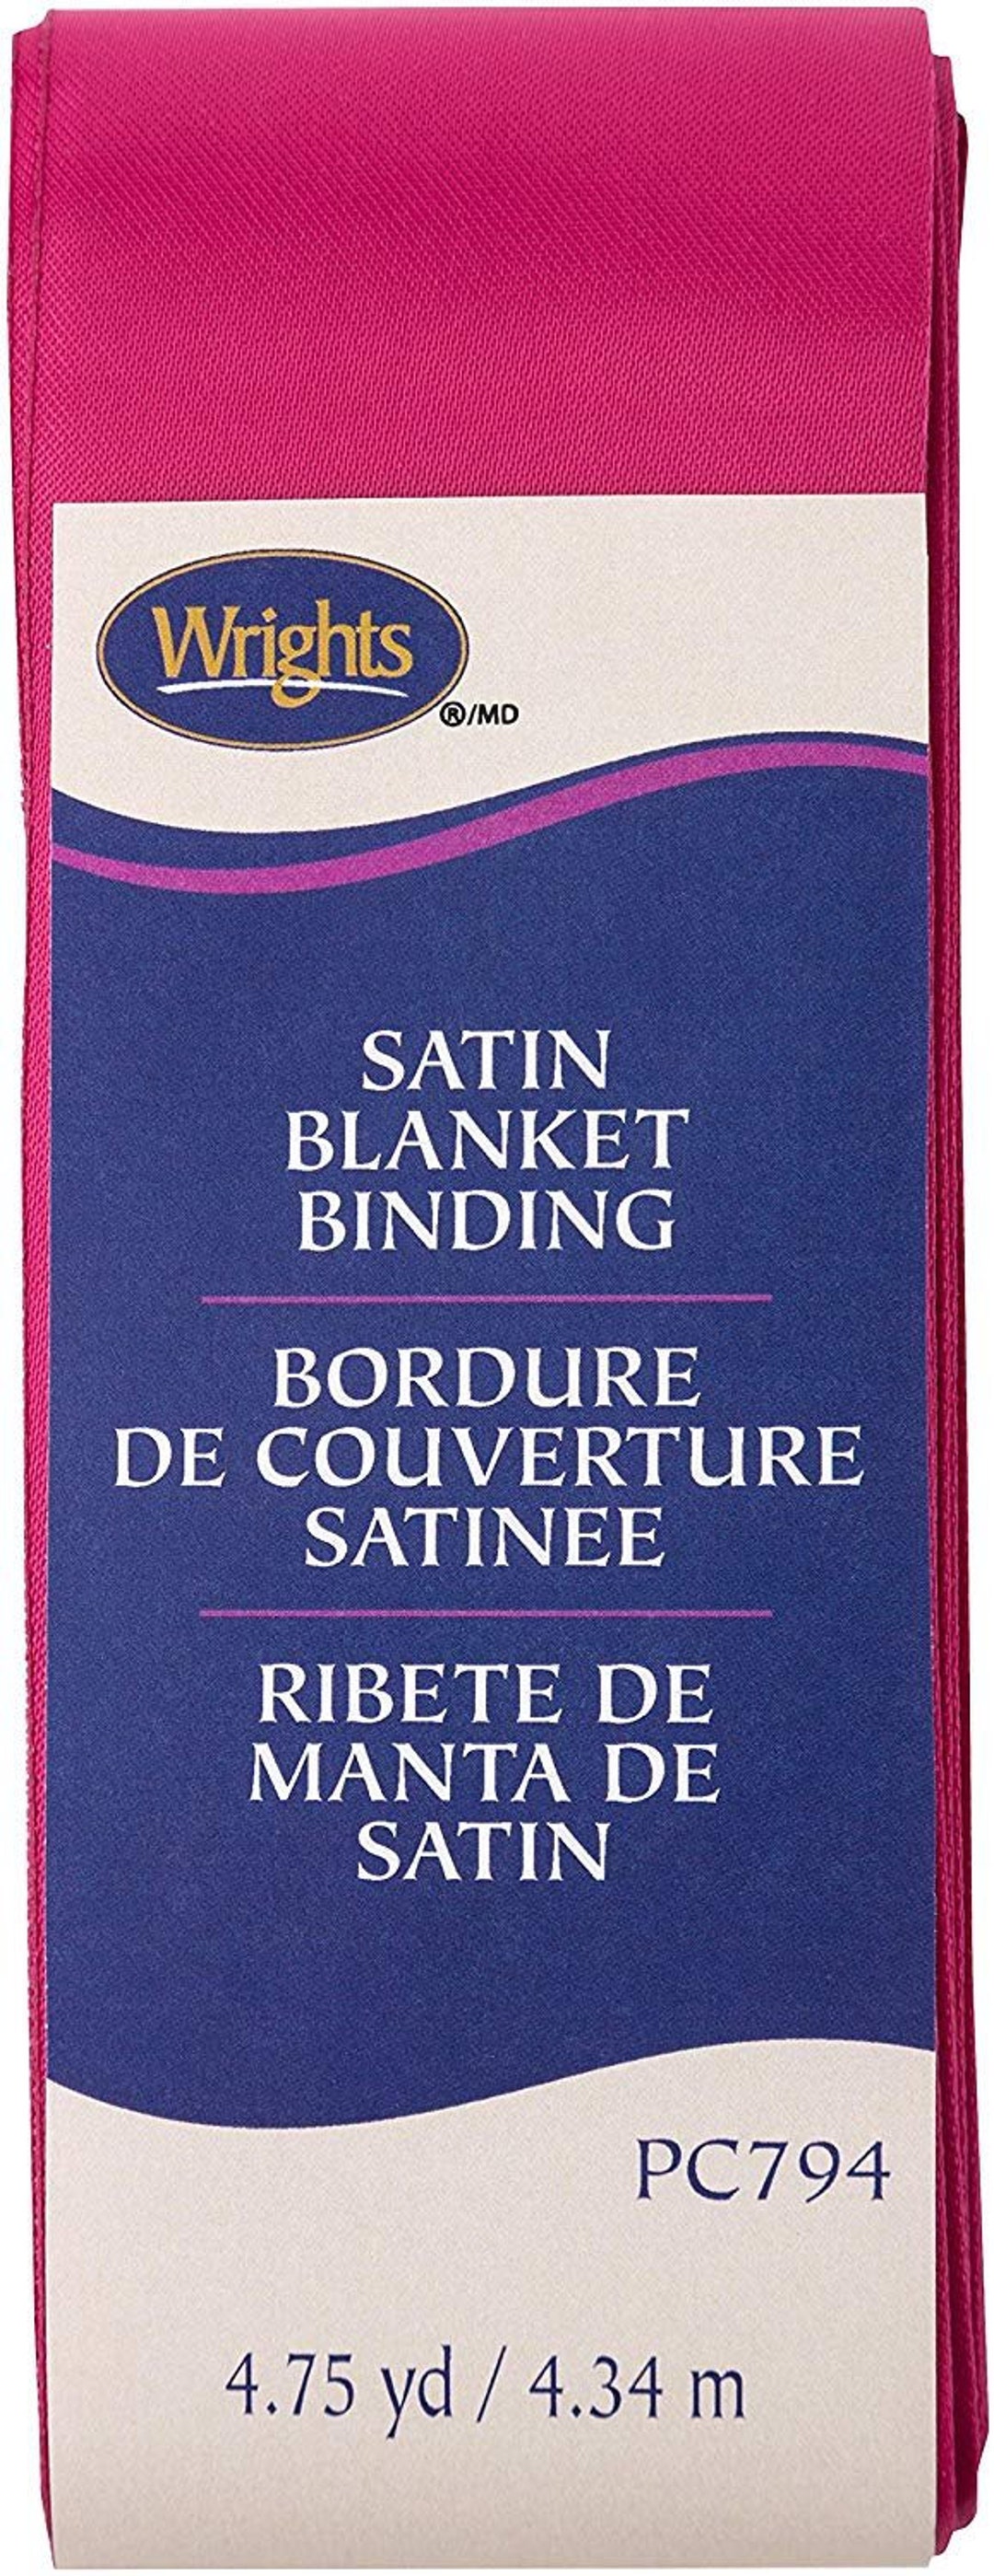 Wrights Blanket Binding, White, 2 Non Bias Satin Blanket Binding For  Sewing And Crafts, 4.75 Yards, 1 Each